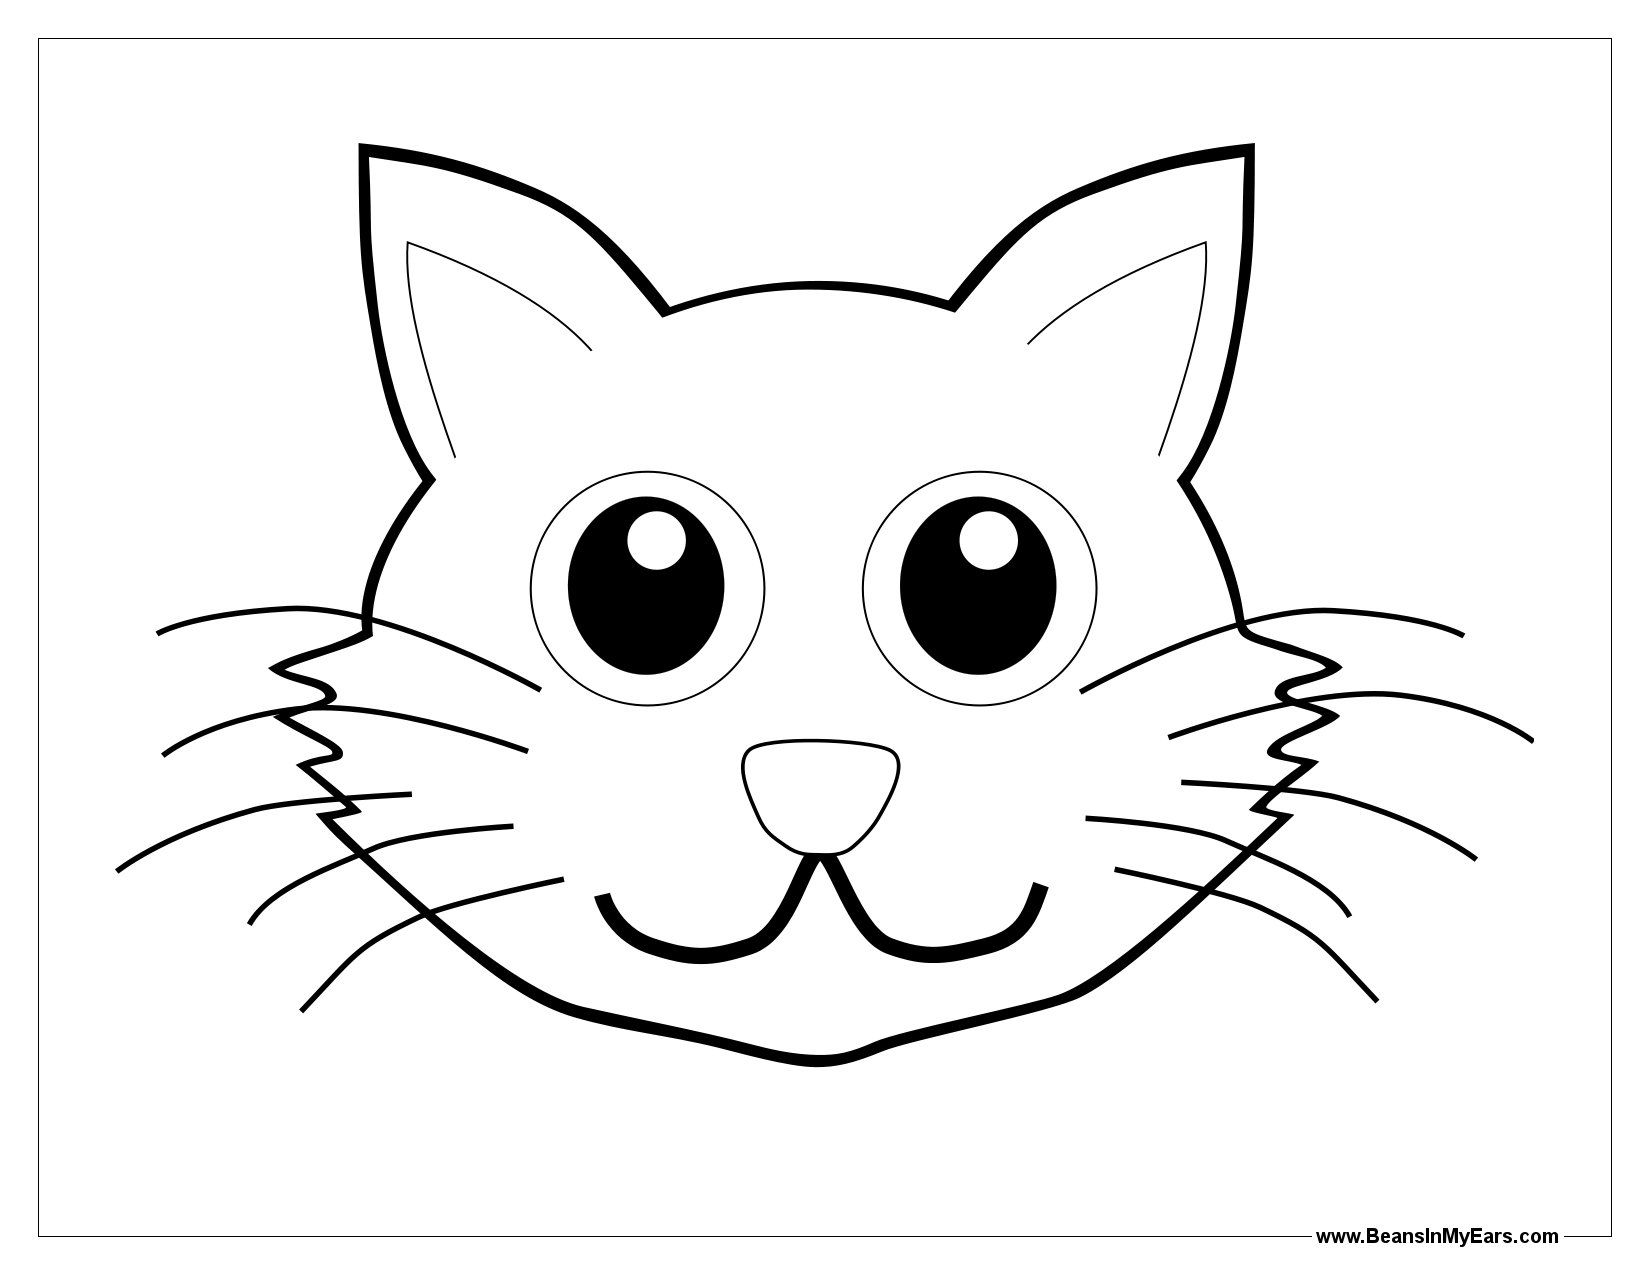 Dog Face Coloring Page   Coloring Home